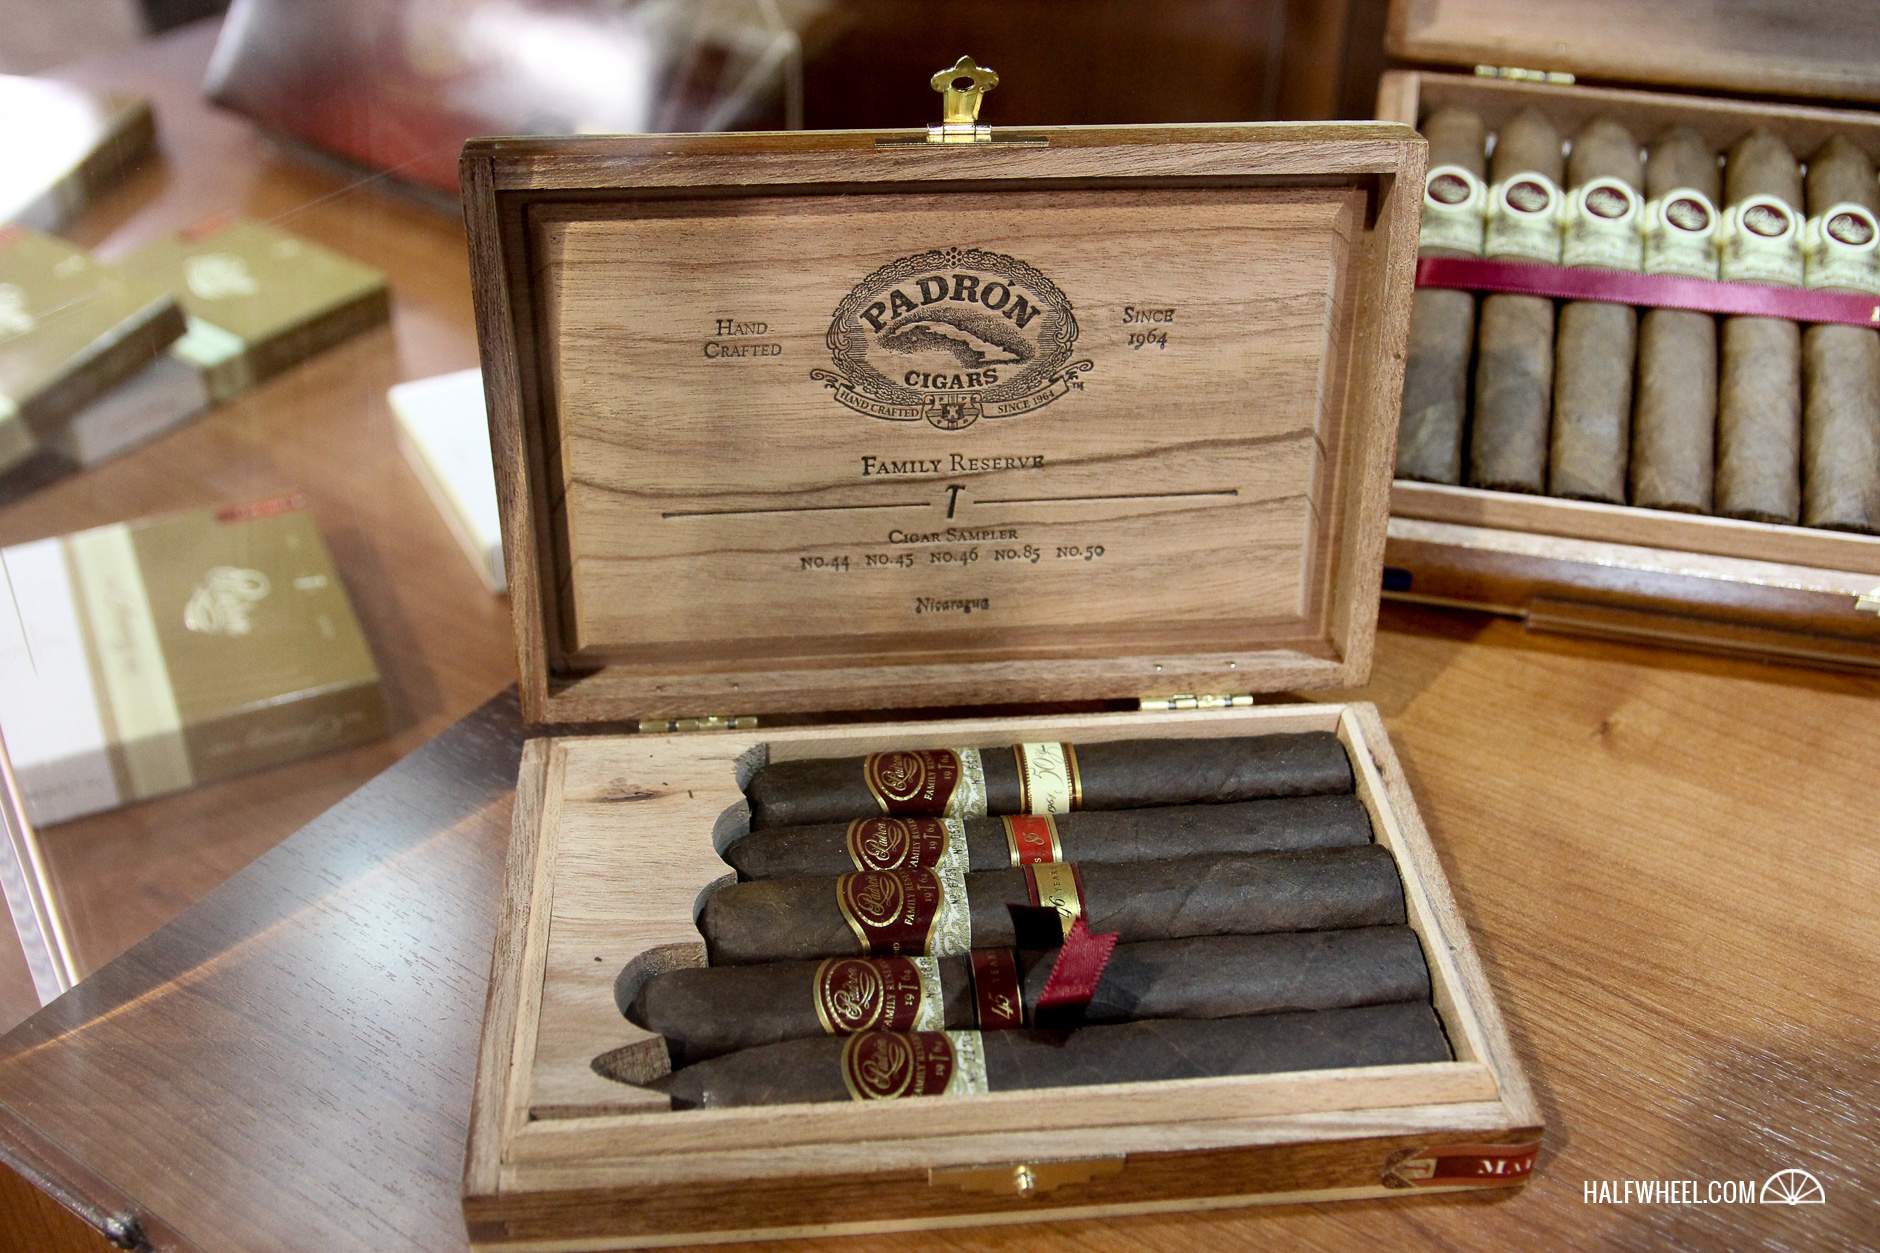 Padron Family Reserve Sampler IPCPR 2016